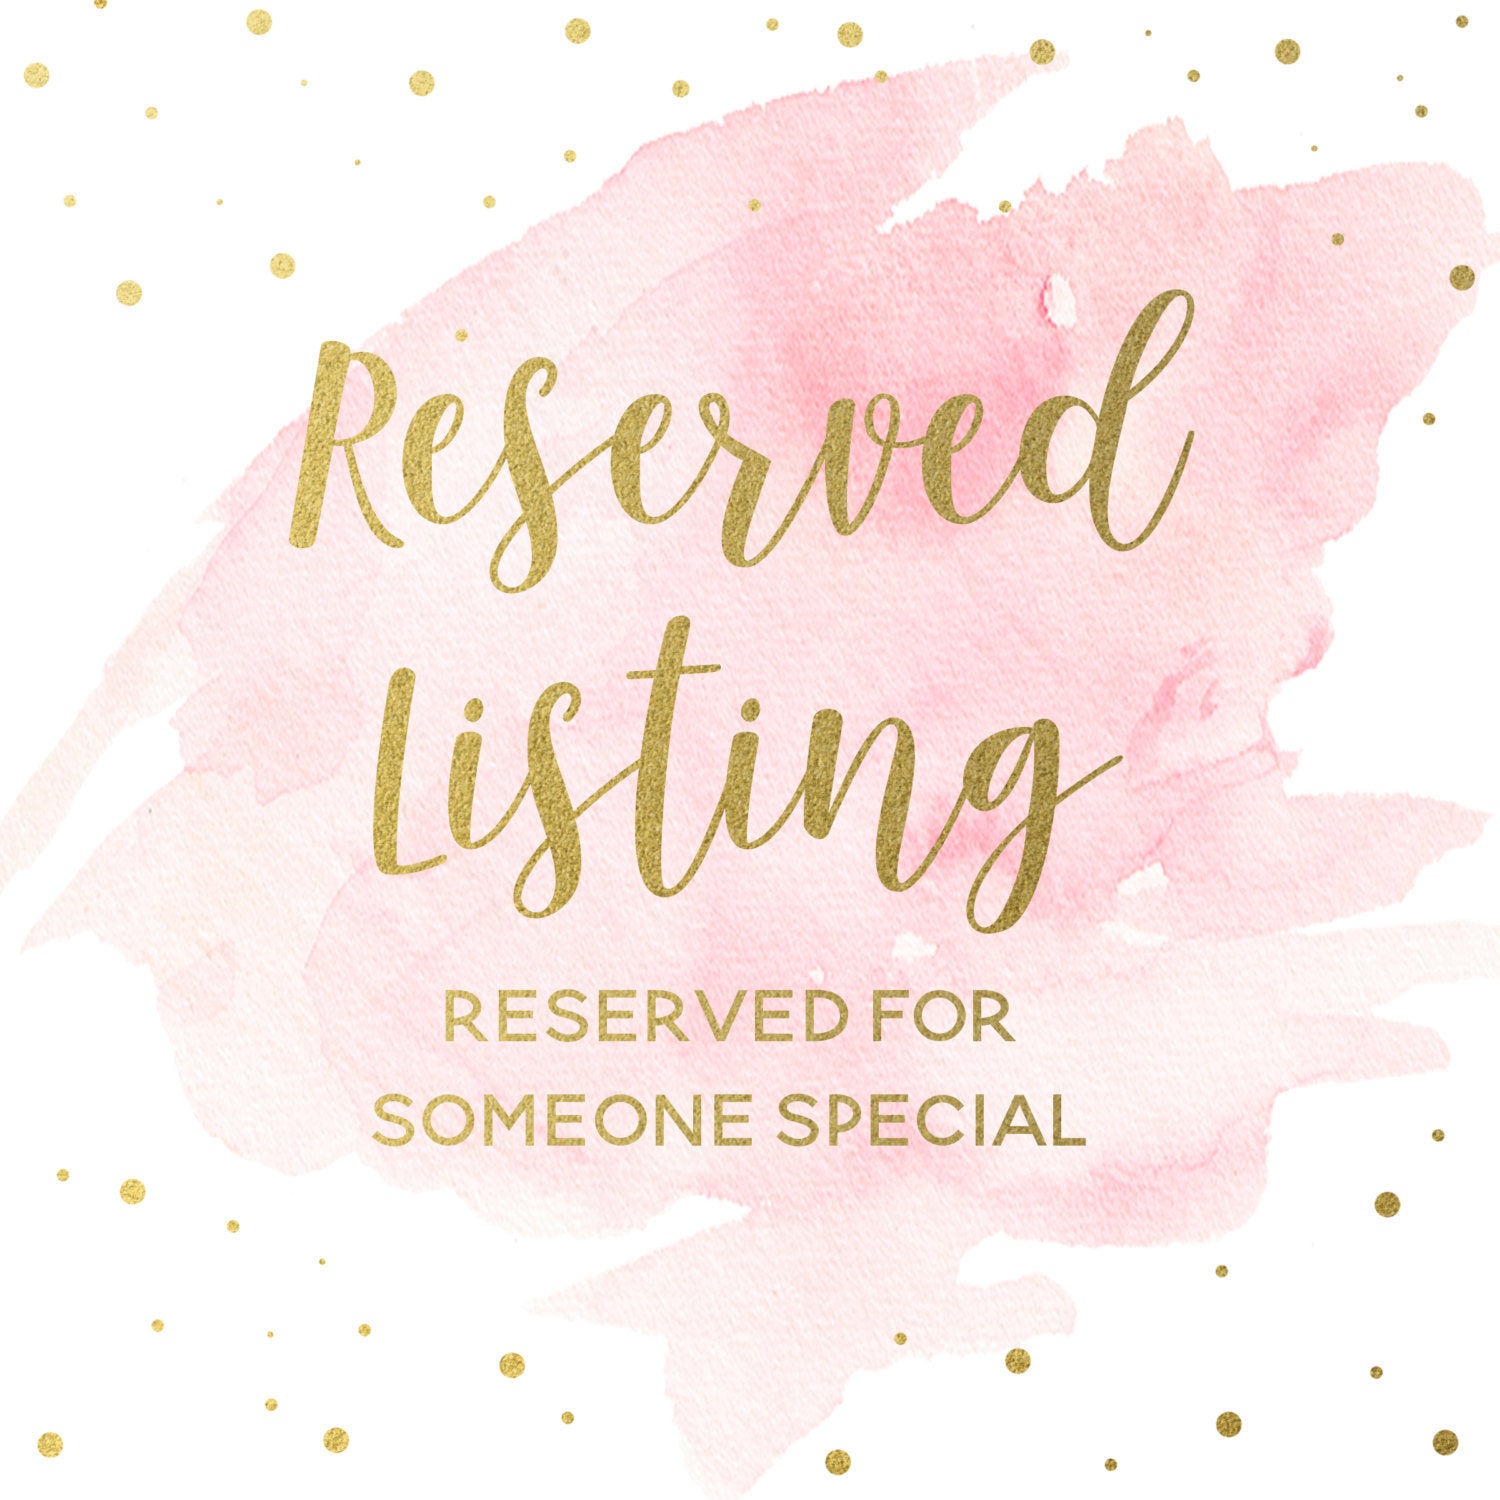 Reserved Listing - D Hulst